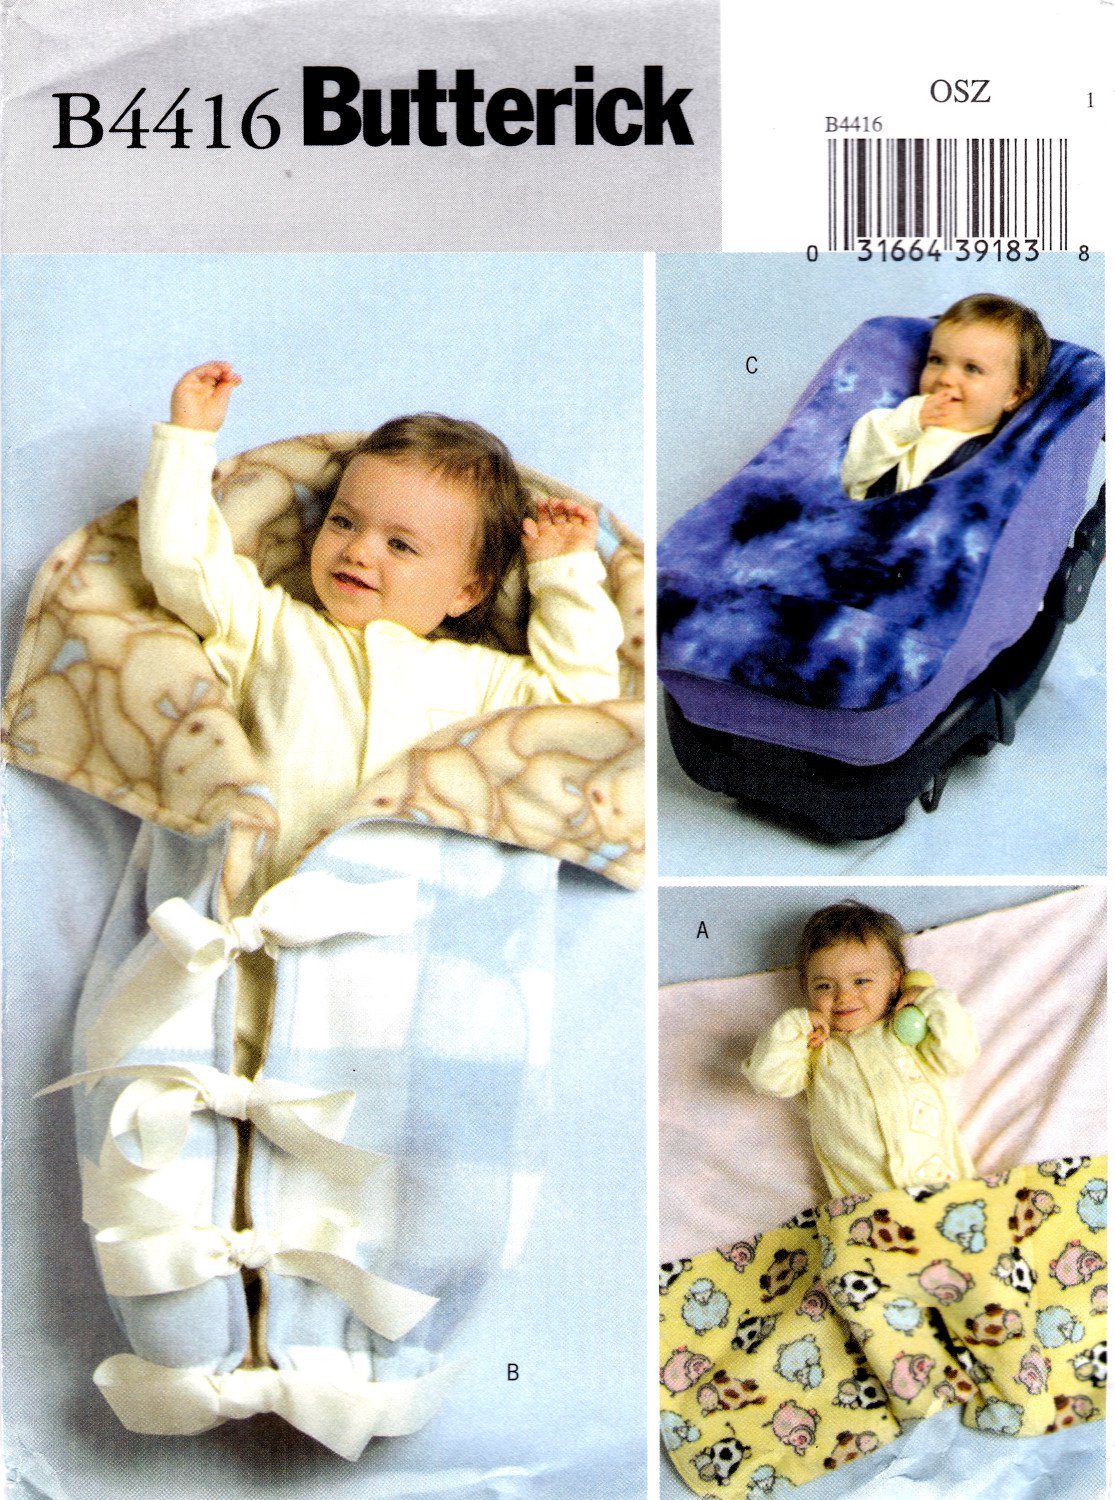 Butterick B4416 Baby Infant Wrap Bunting Car Seat Cover Sewing Pattern Sizes OSZ